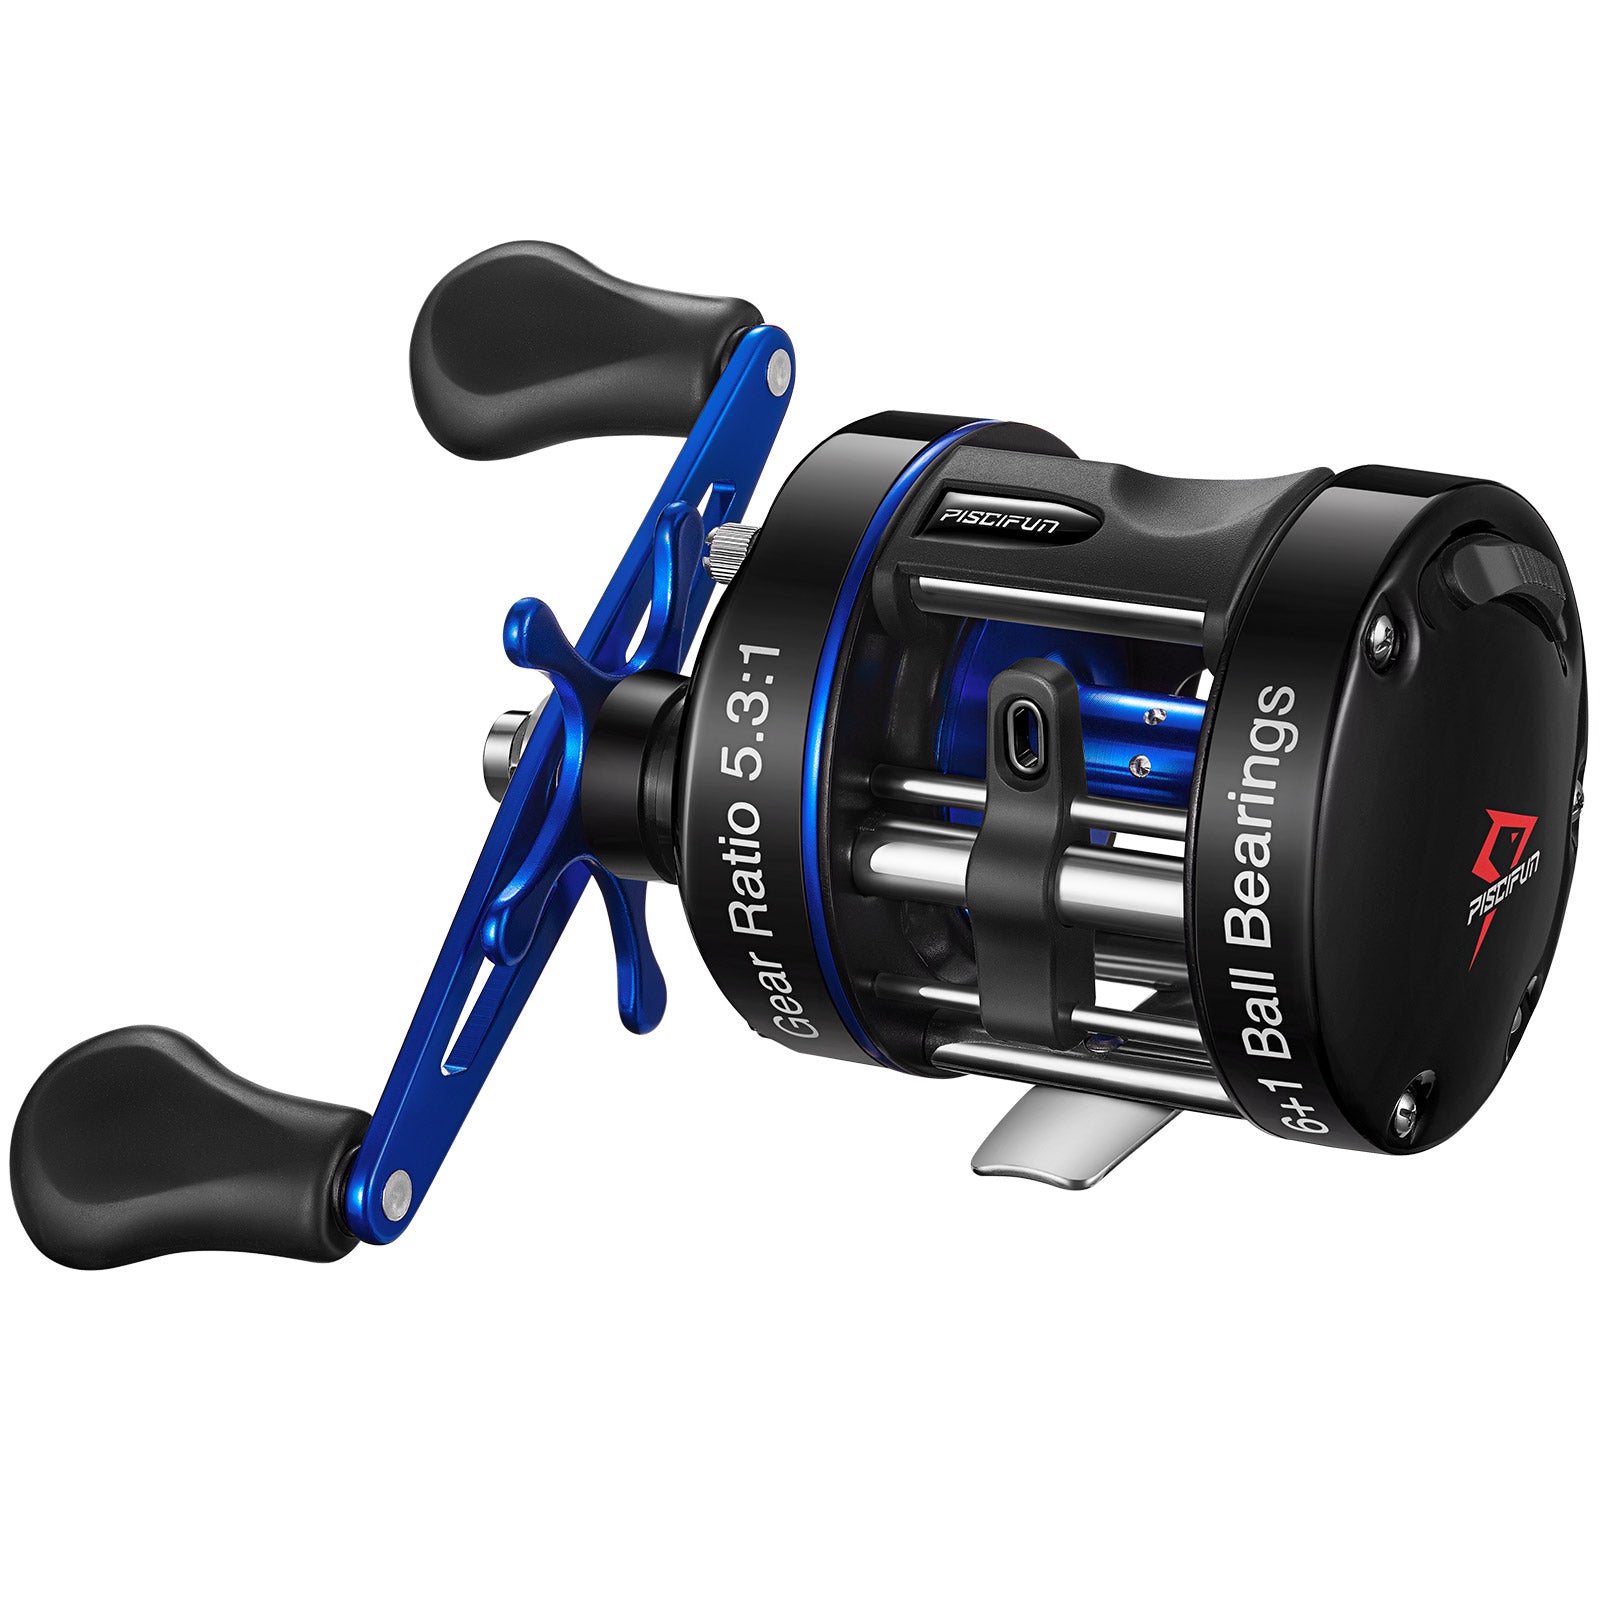 10 Bearing Baitcaster for UNDER $20 at Academy! (Fishing Clearance